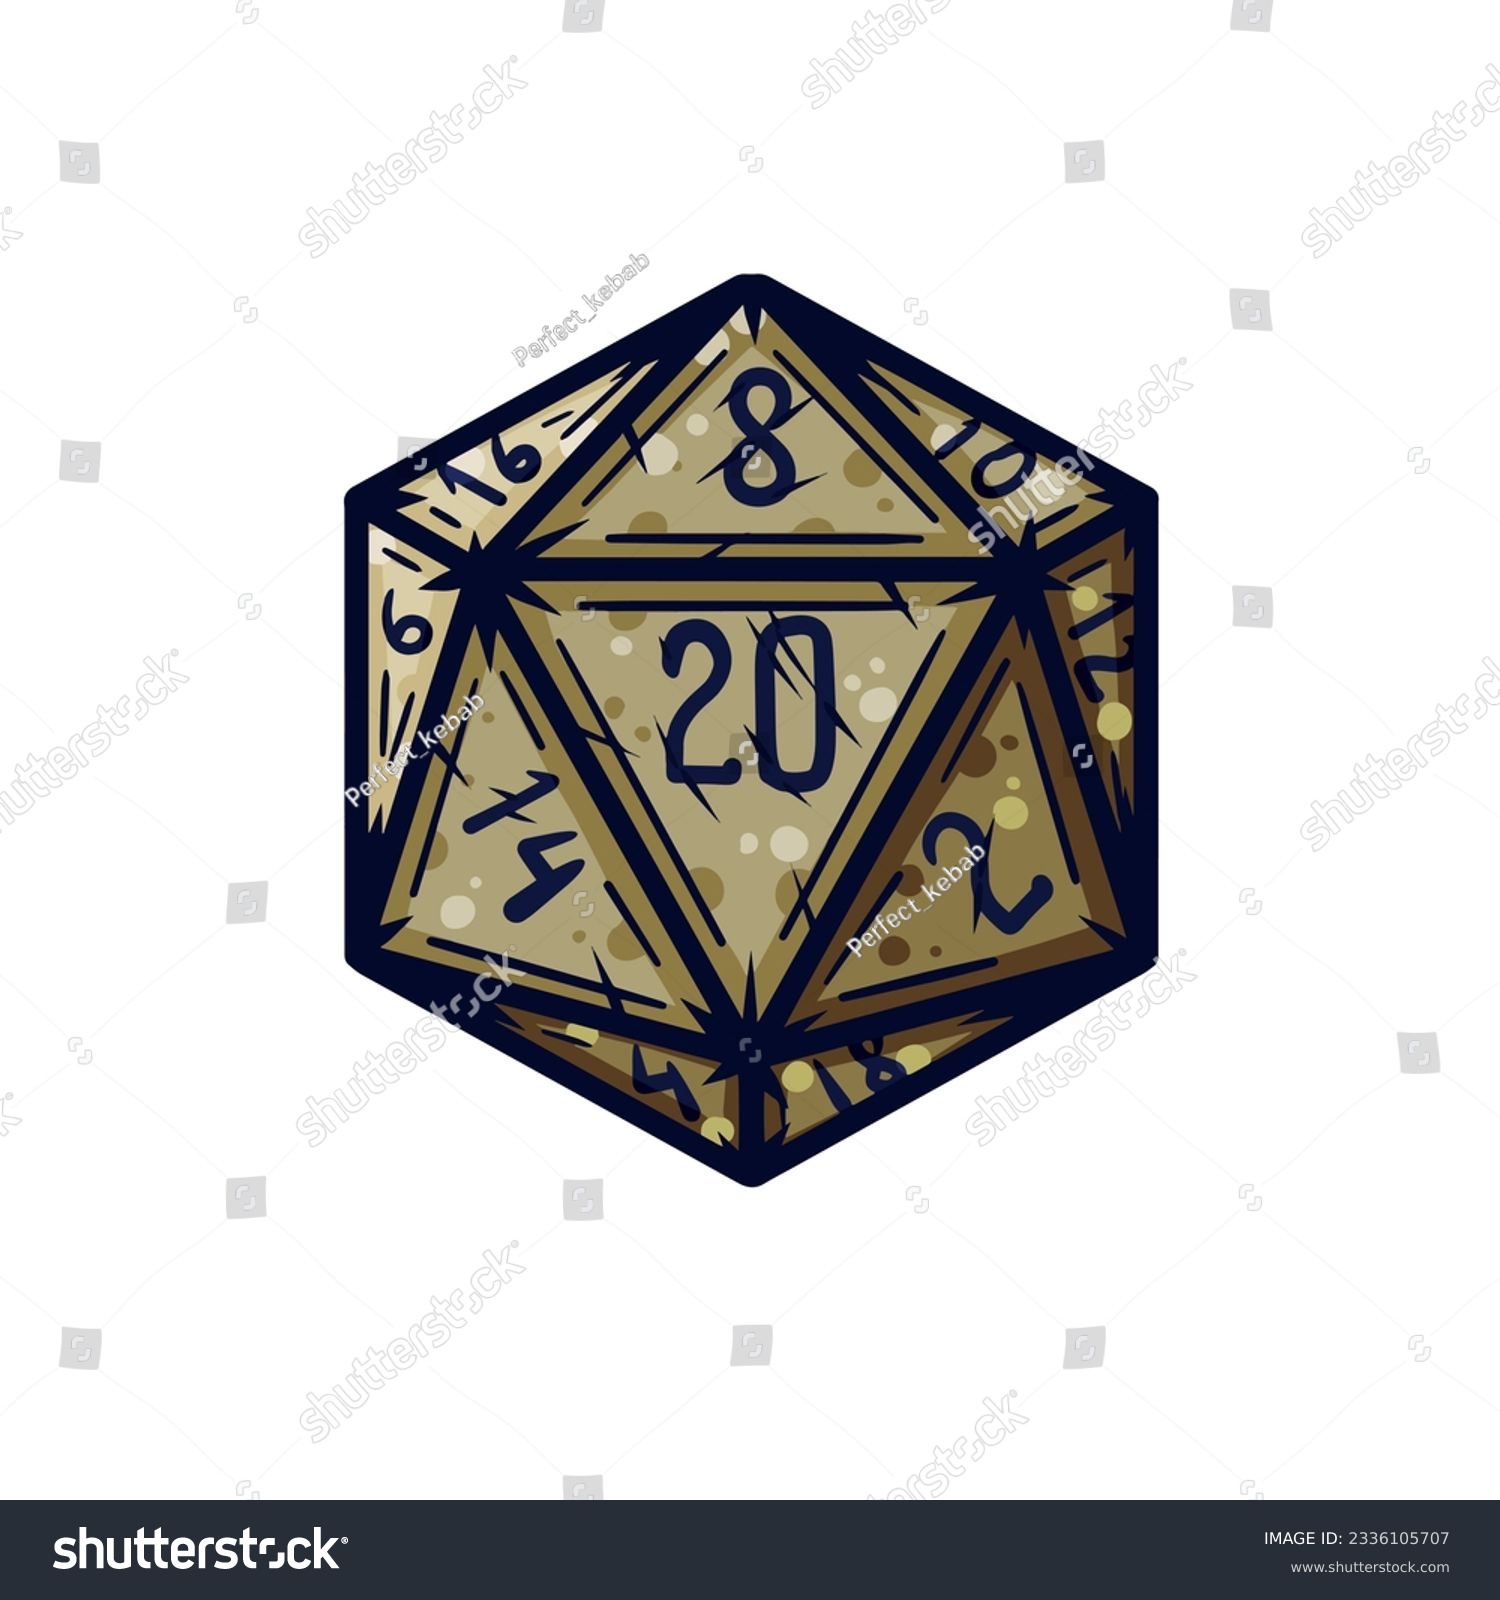 SVG of Dice d20 for playing Dnd. Dungeon and dragons board game. Cartoon outline drawn illustration svg